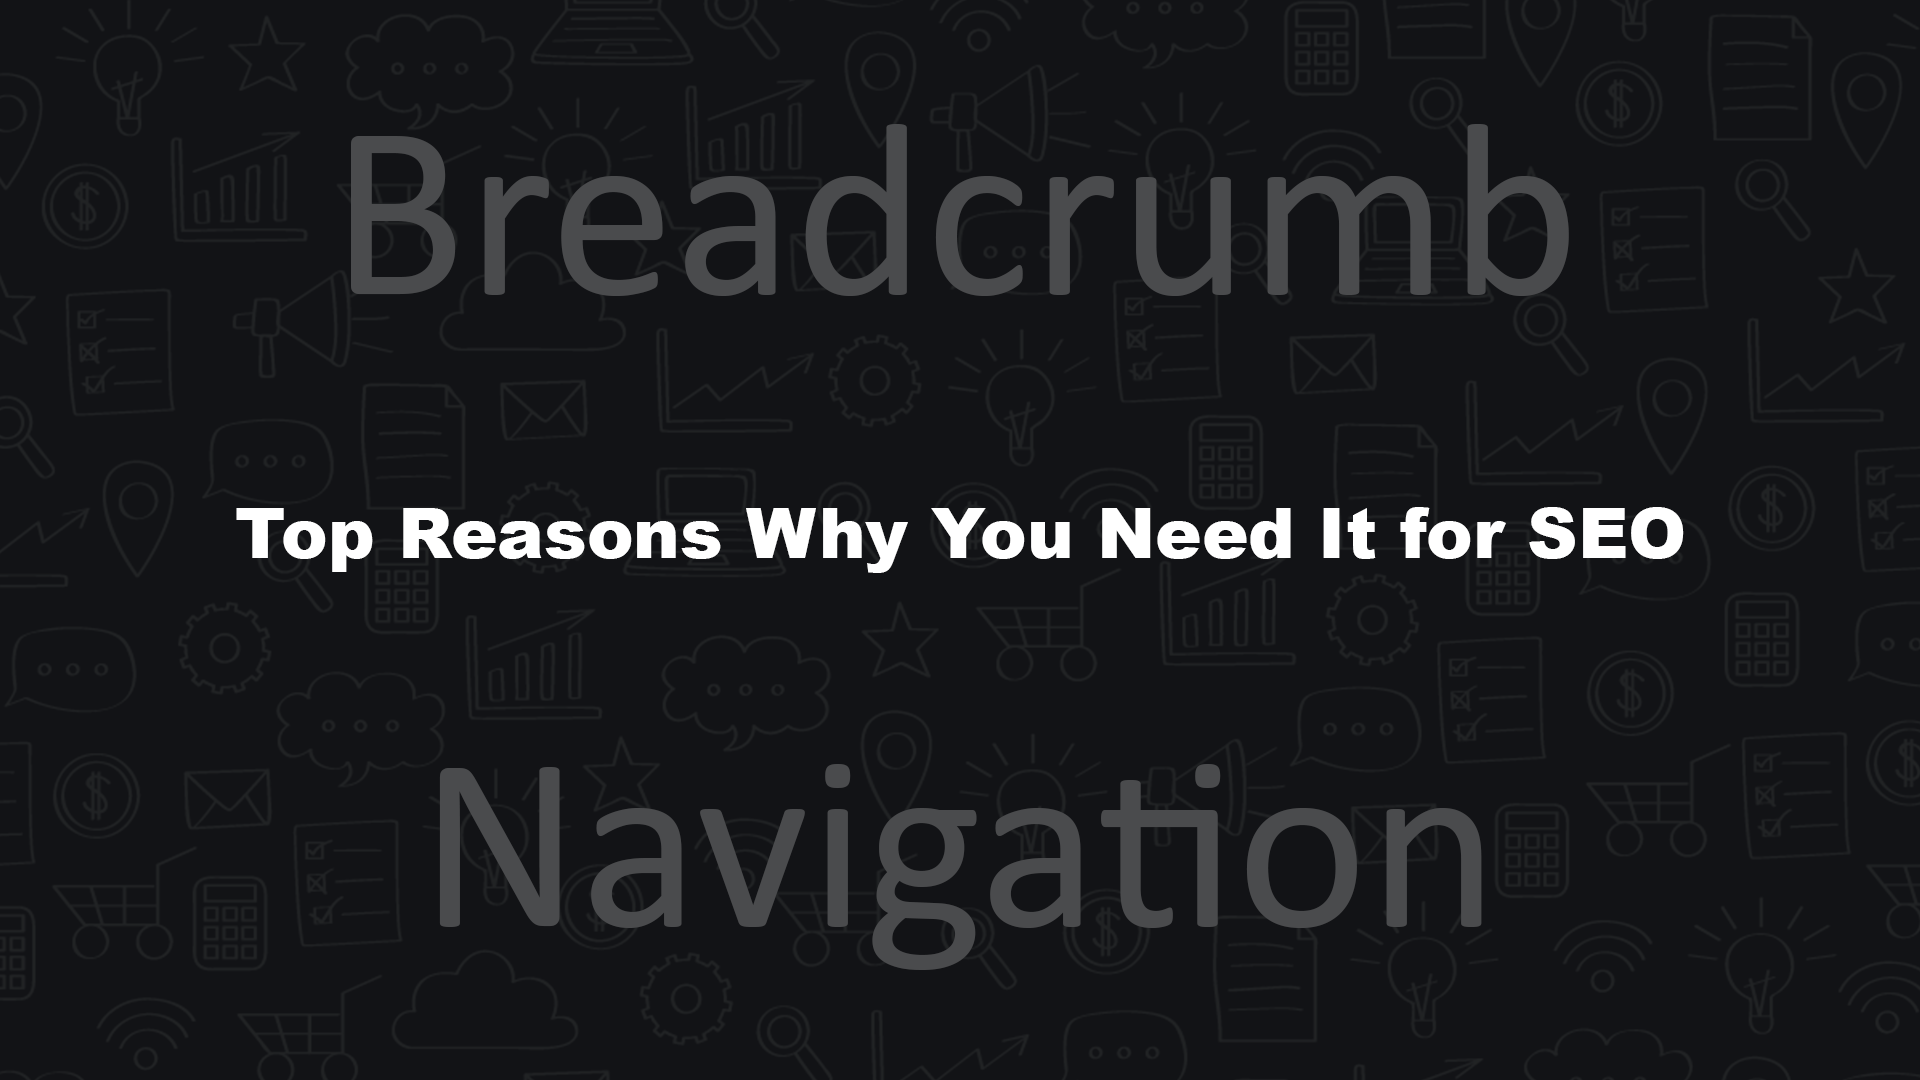 Breadcrumb Navigation Top Reasons Why You Need It for SEO